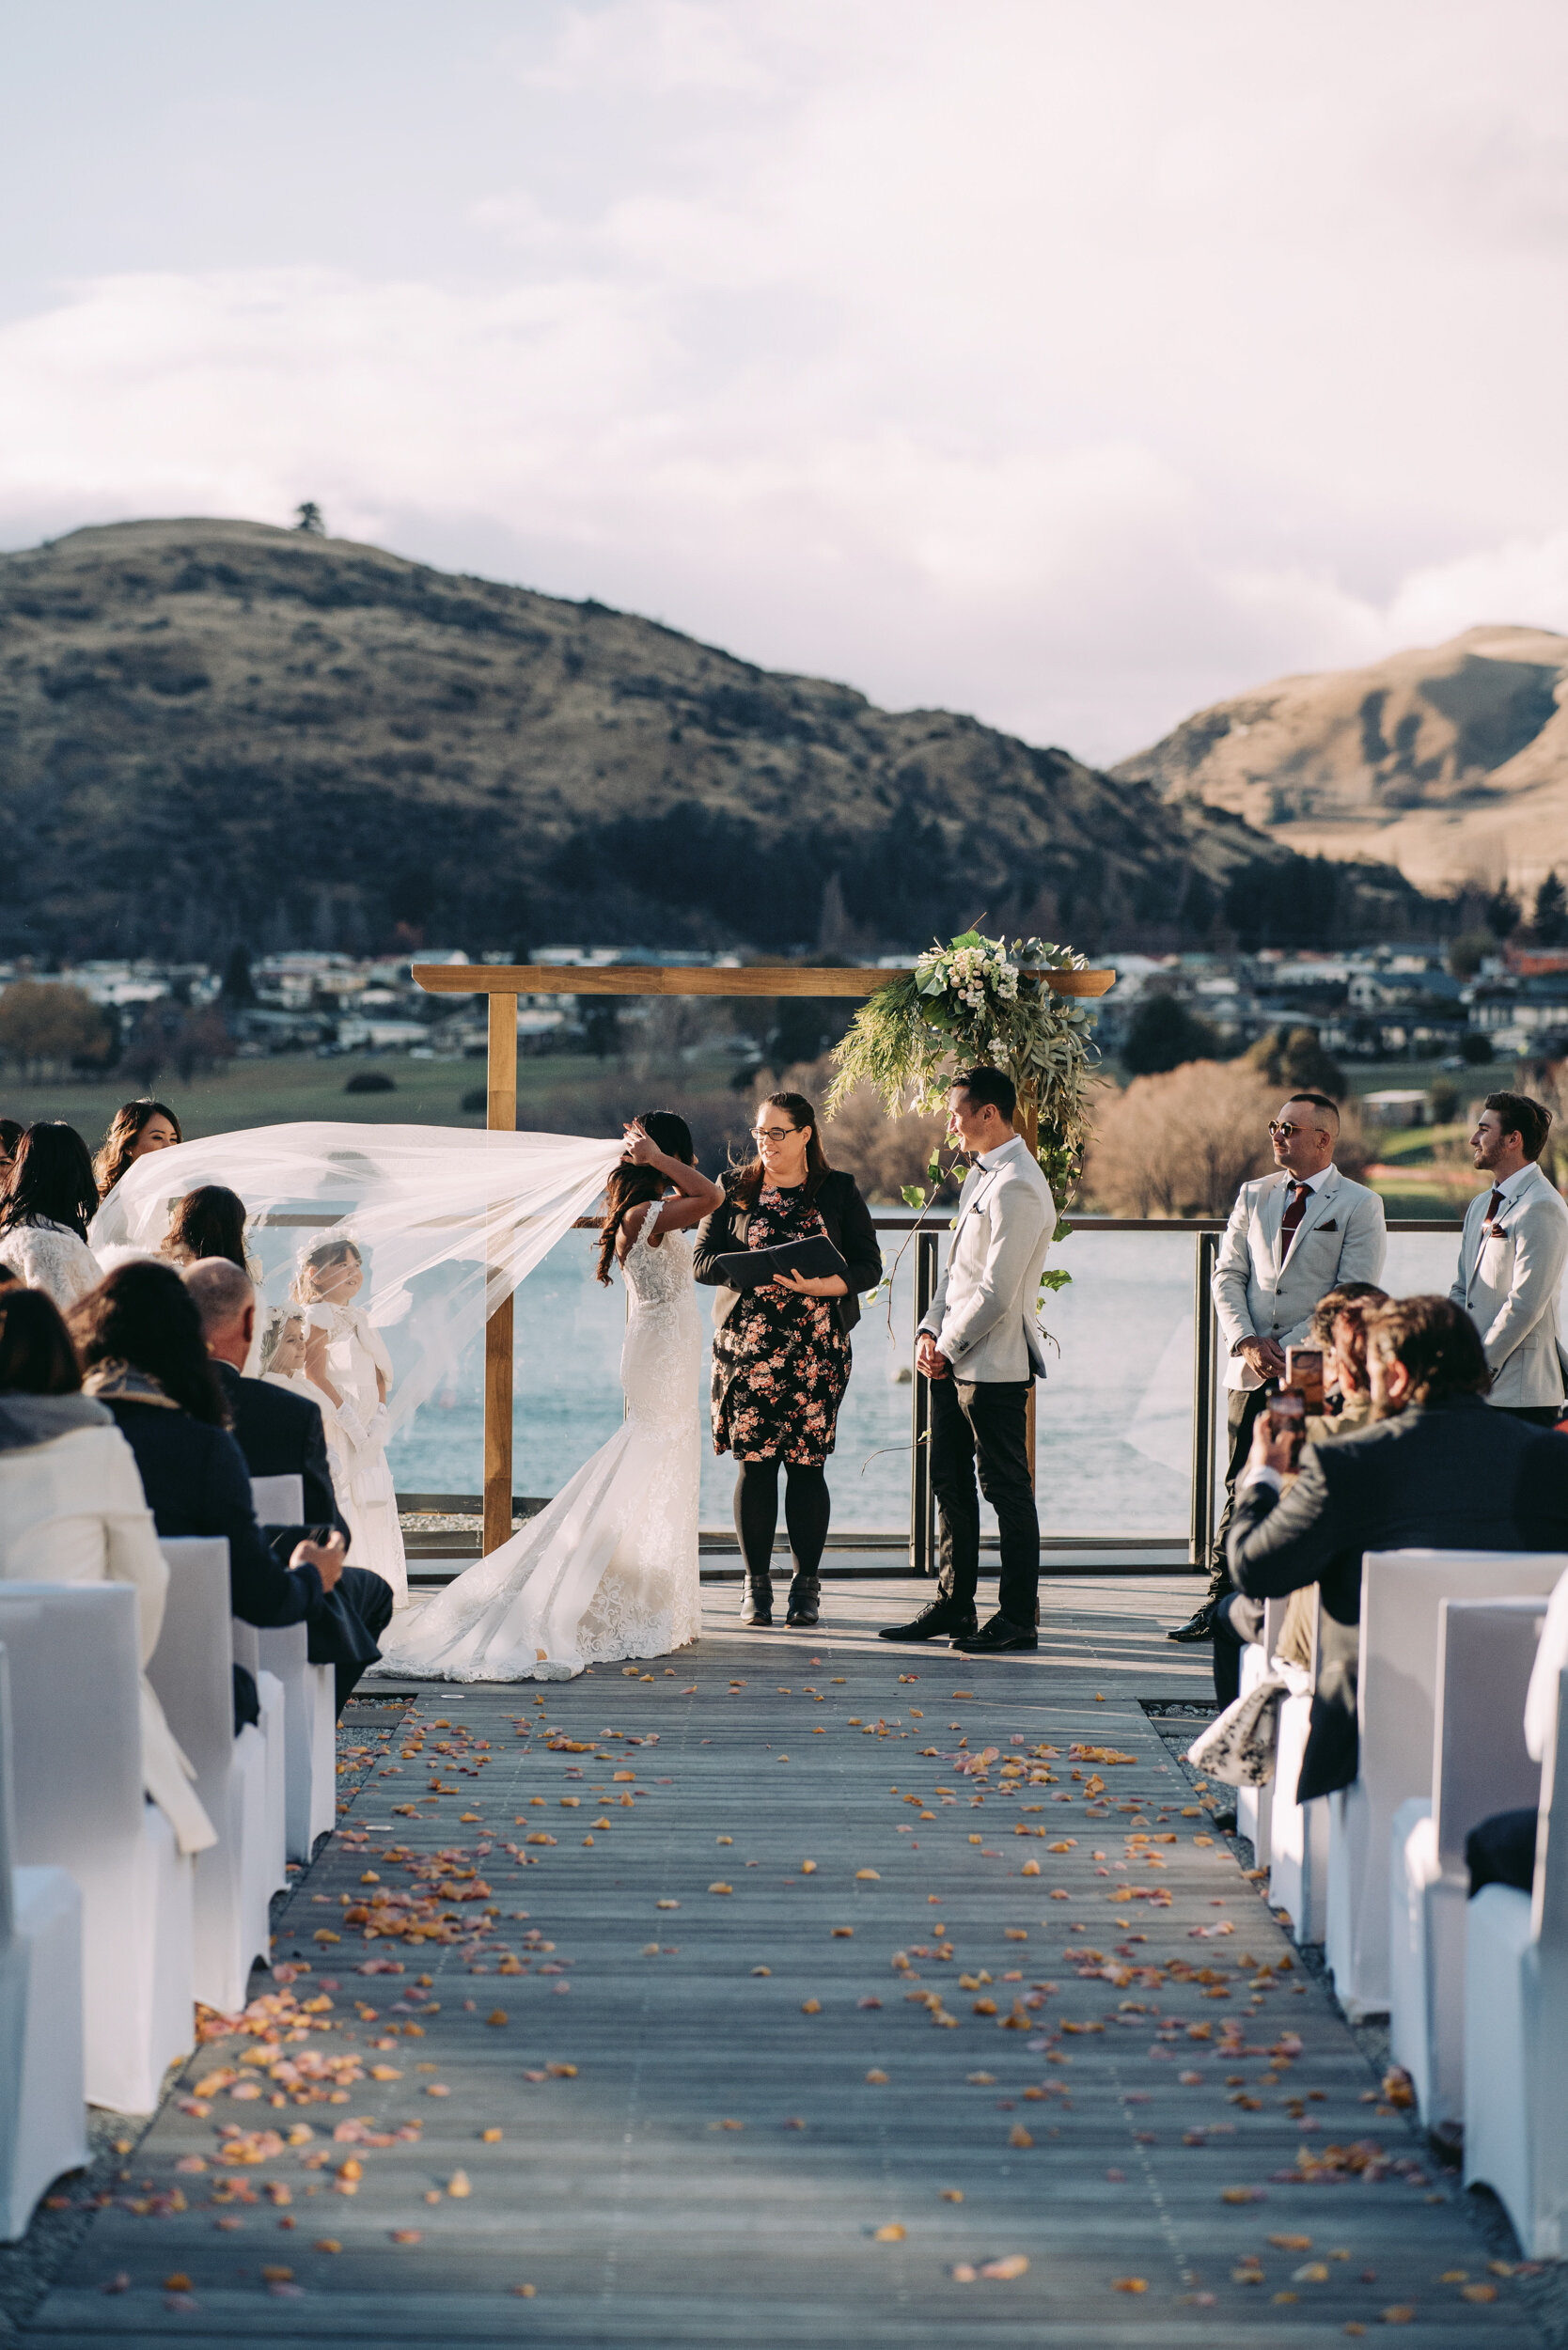 Auckland Wedding Photographer and Videography | Queenstown Wedding Venue | Heli Wedding Photography | Hilton Queenstown Resort &amp; Spa | Destination Wedding Photography